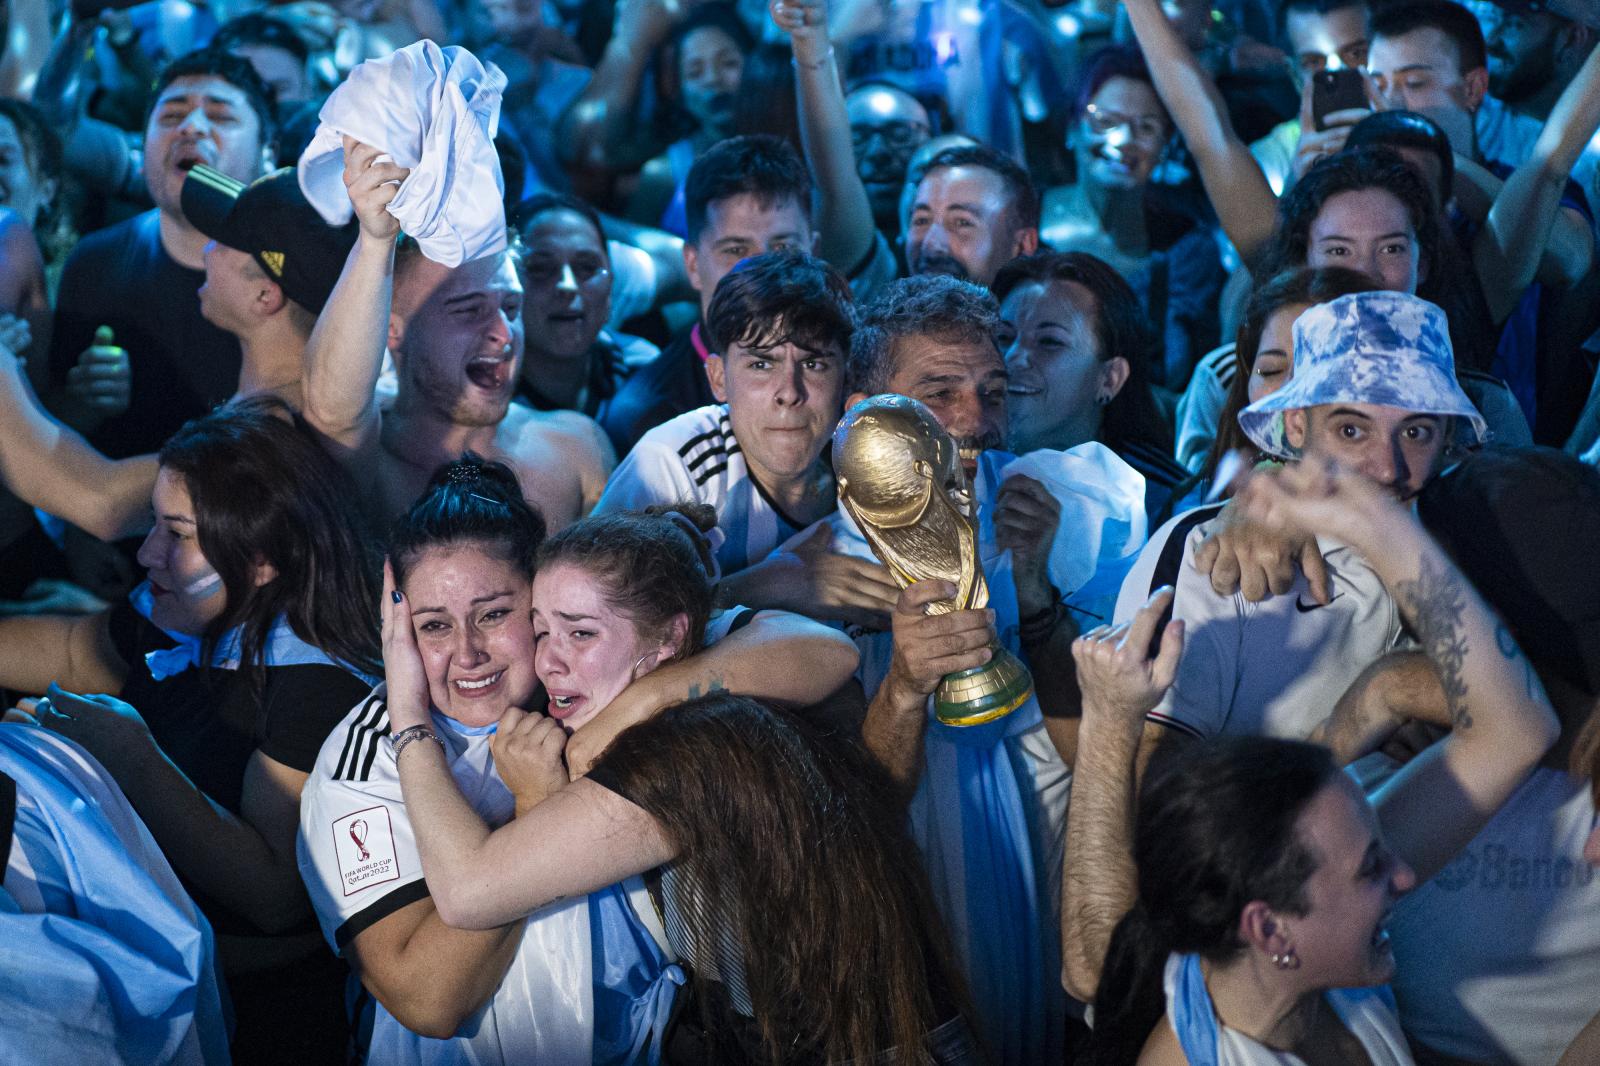 Image from Daily News - Argentina fans celebrate in a discotheque in Barcelona,...